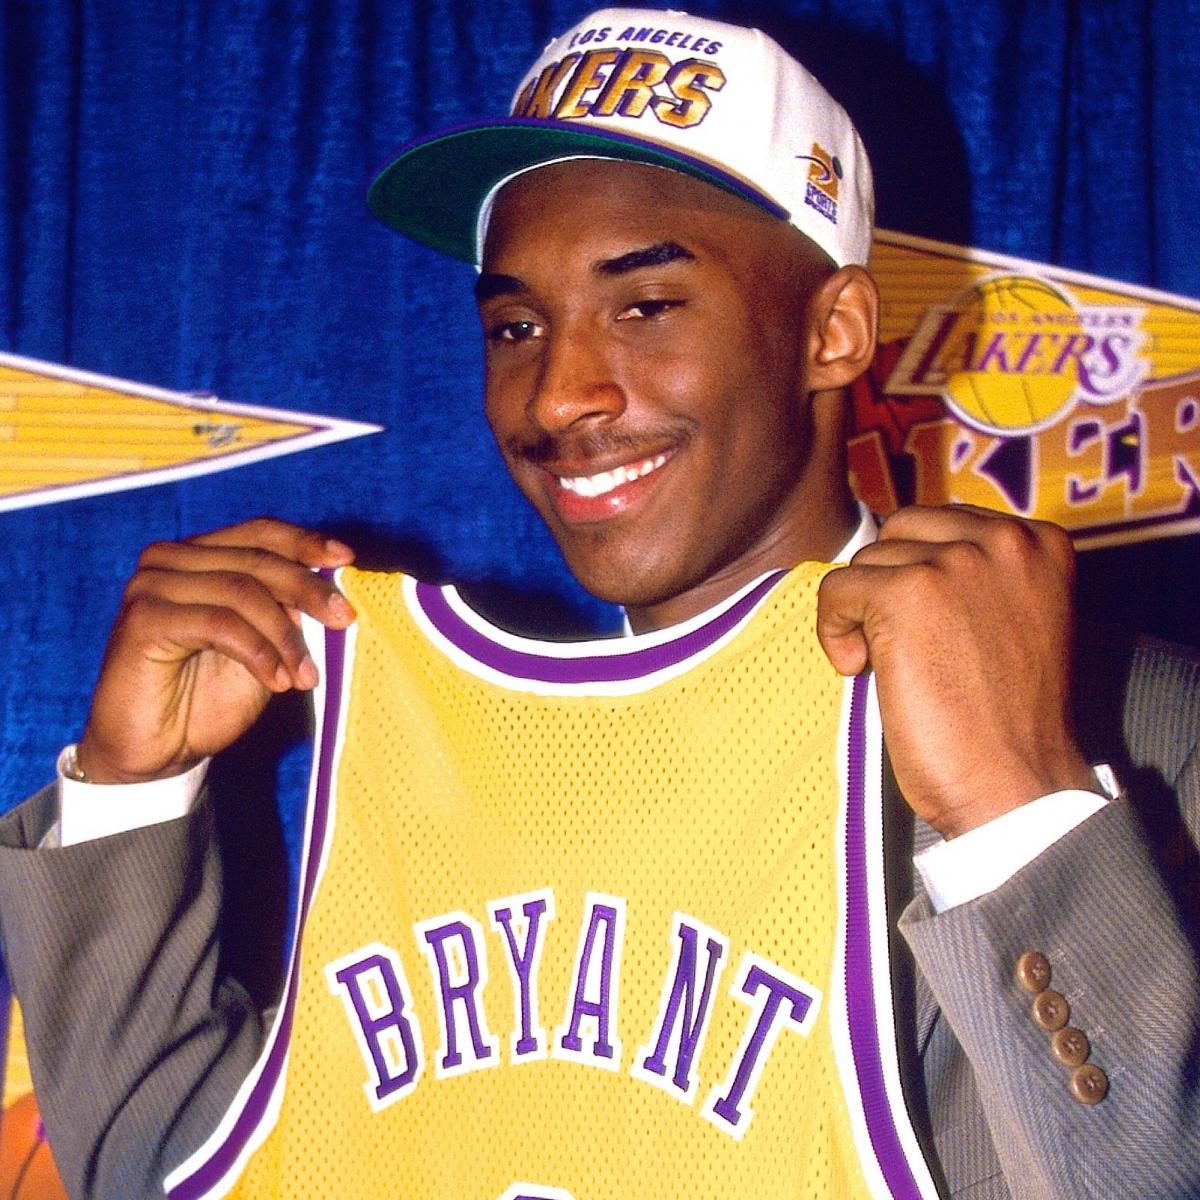 Boys Among Men: Kobe Bryant and his pre-draft workouts with the